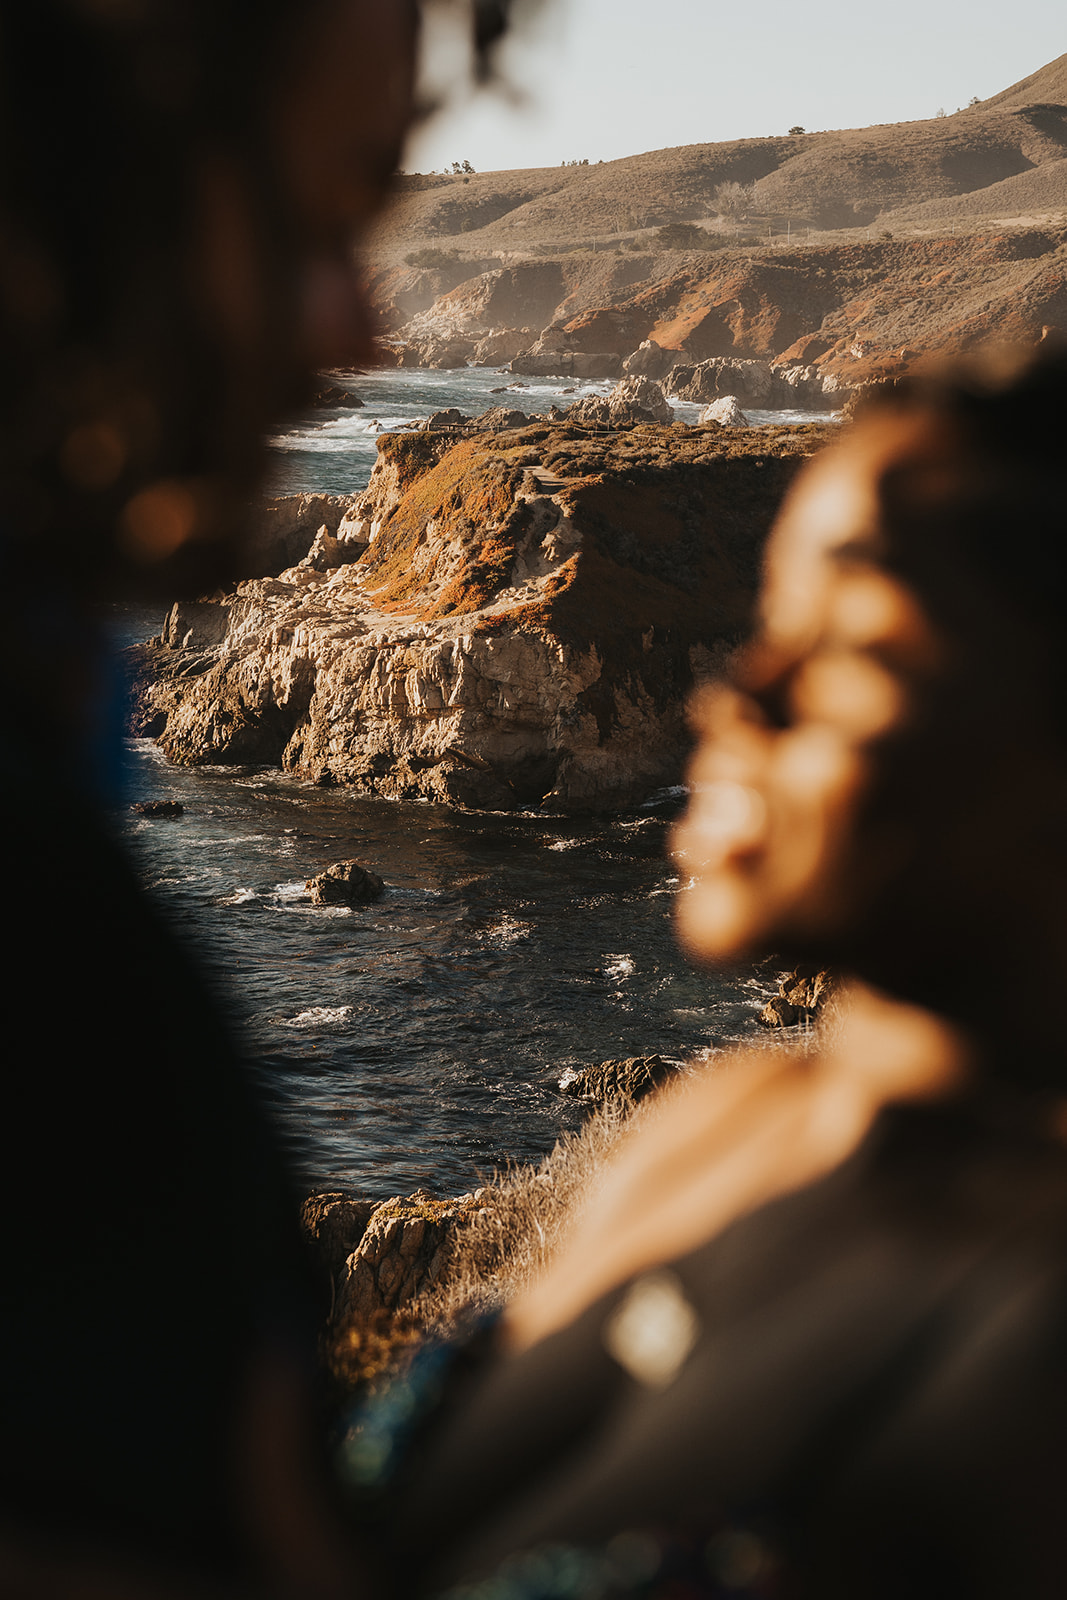 Couple in foreground of image while the Big Sur coastline is in focus behind them